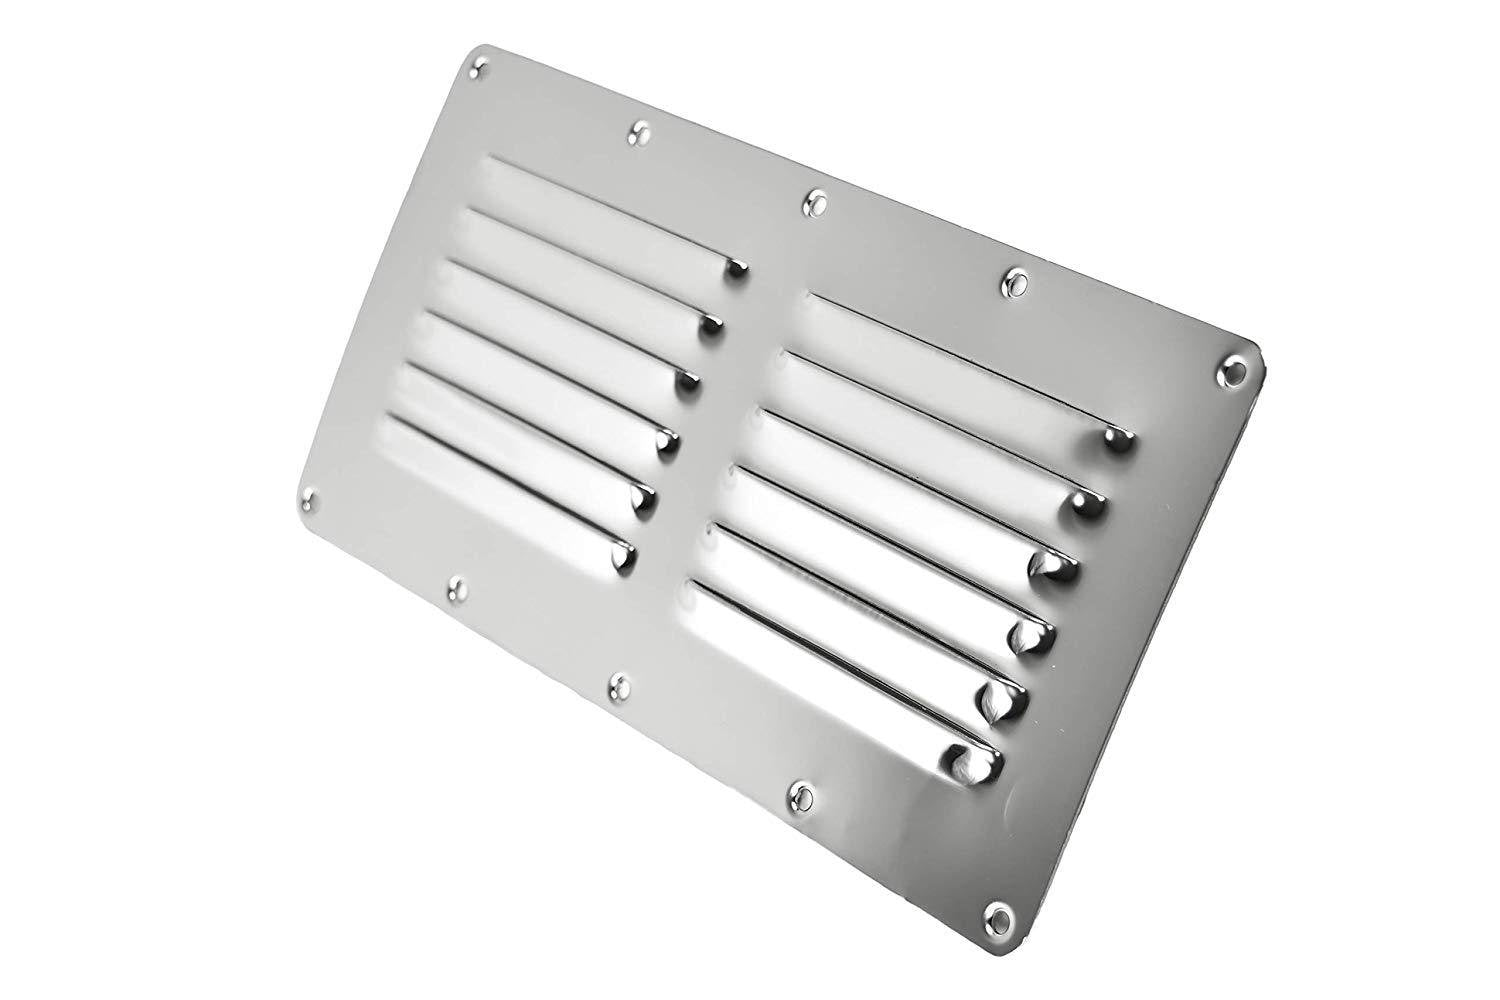 Marine City Stainless-Steel 9-1/8” × 5” Rectangle Stamped Louvered Vent (1pcs)